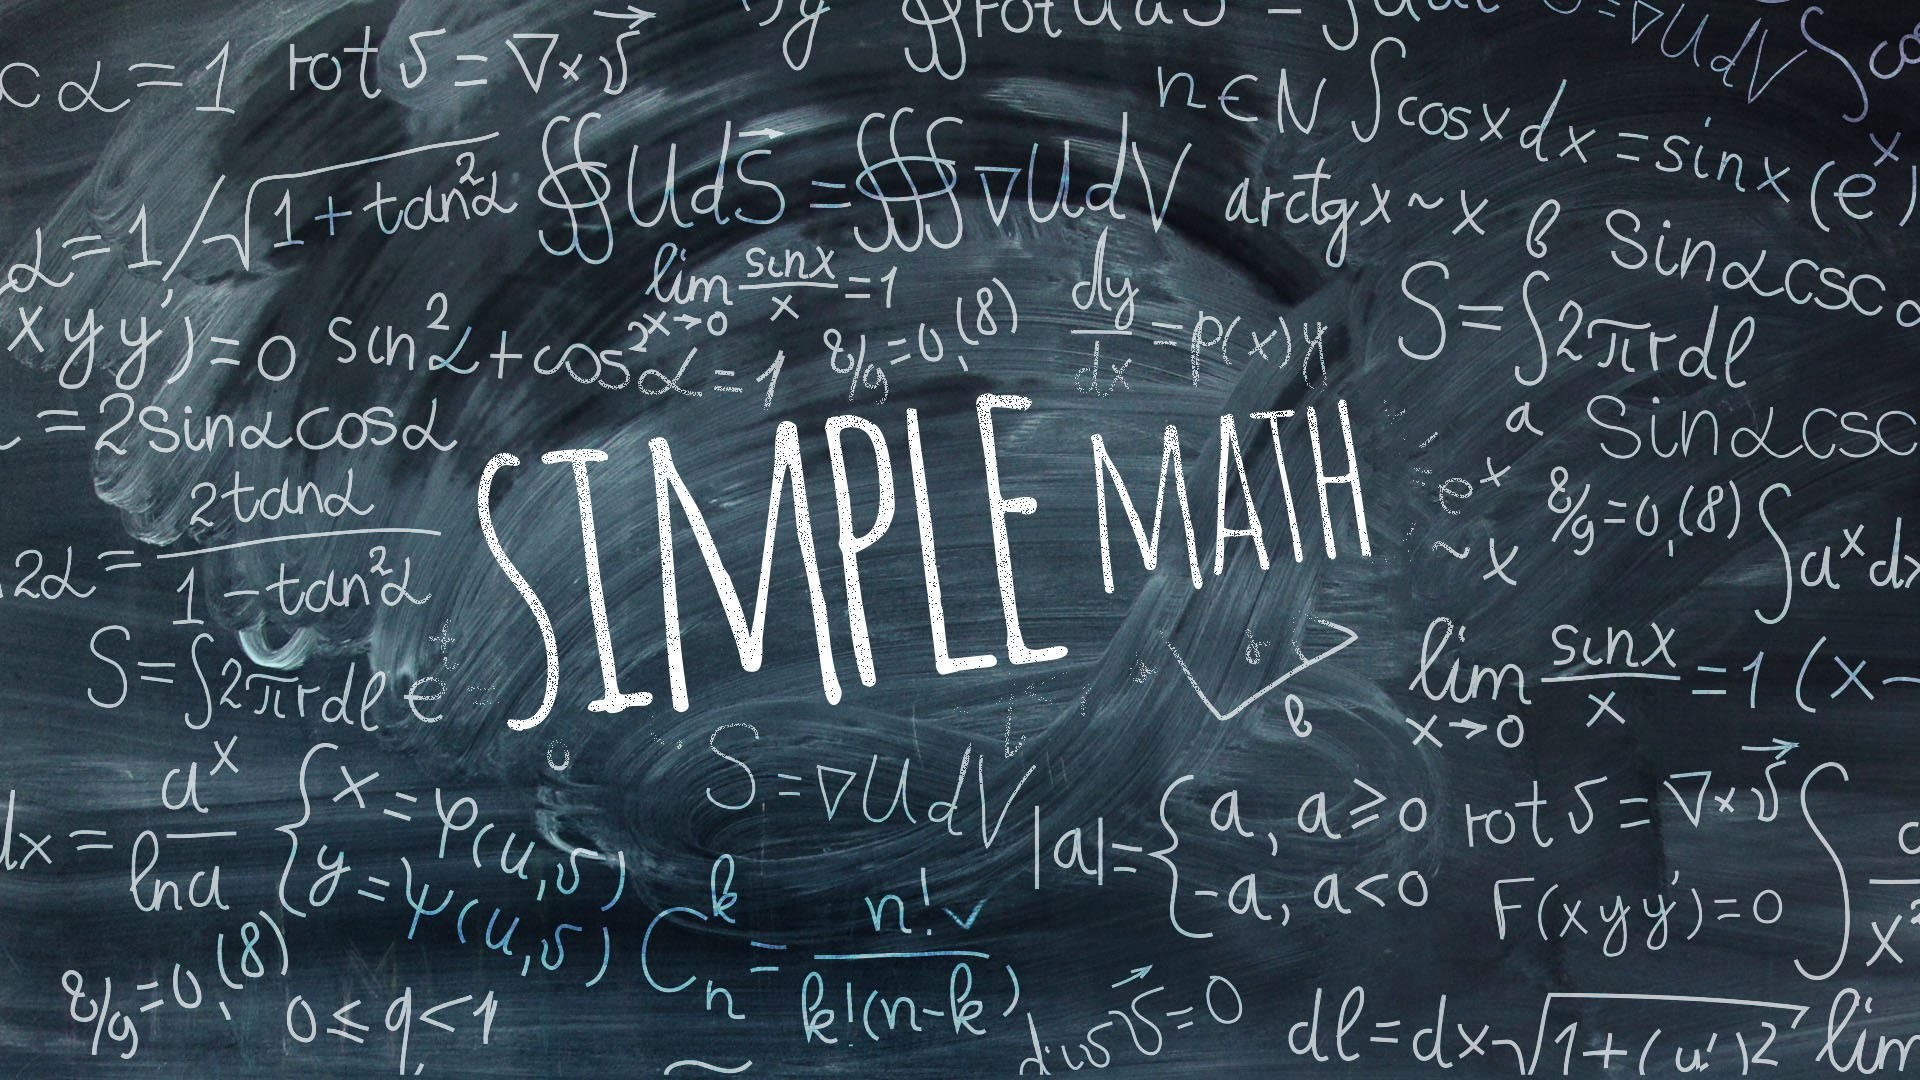 Cool Math Wallpapers 71 images